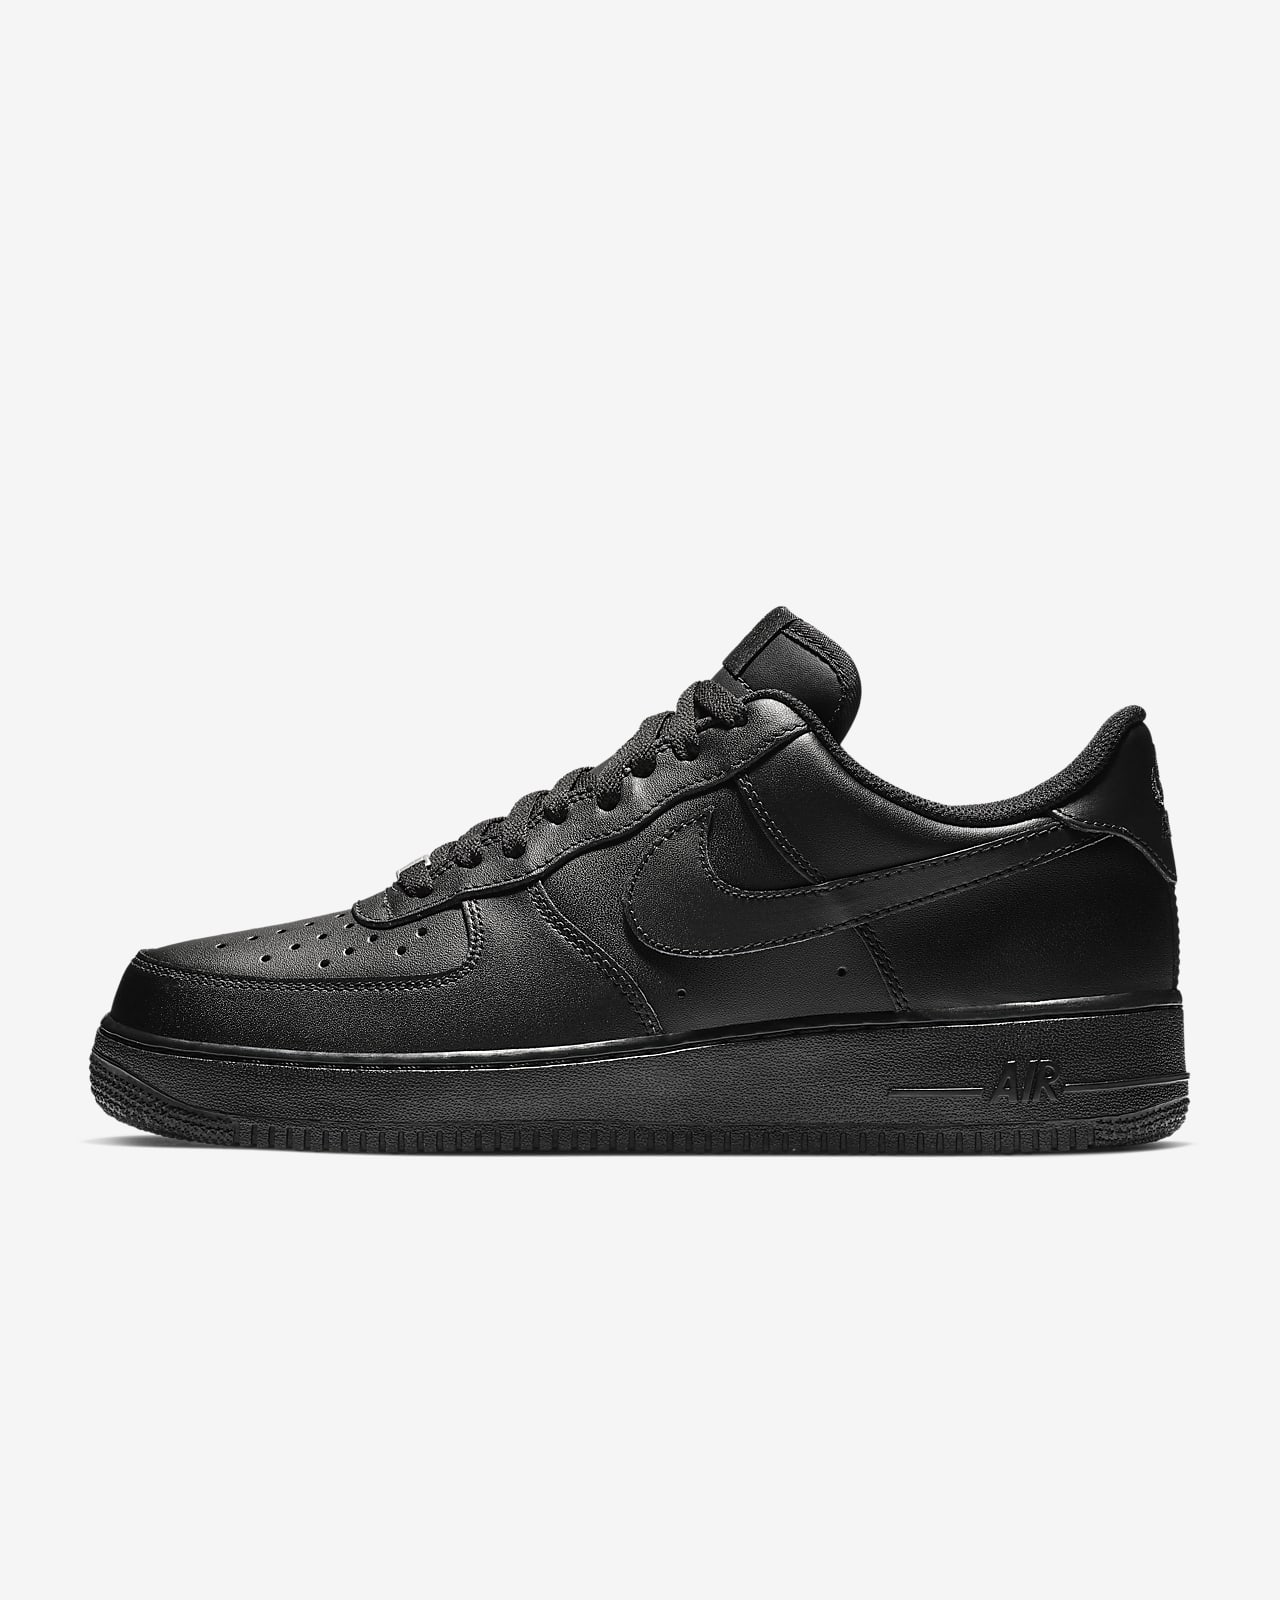 nike air force 1 size 8.5 mens